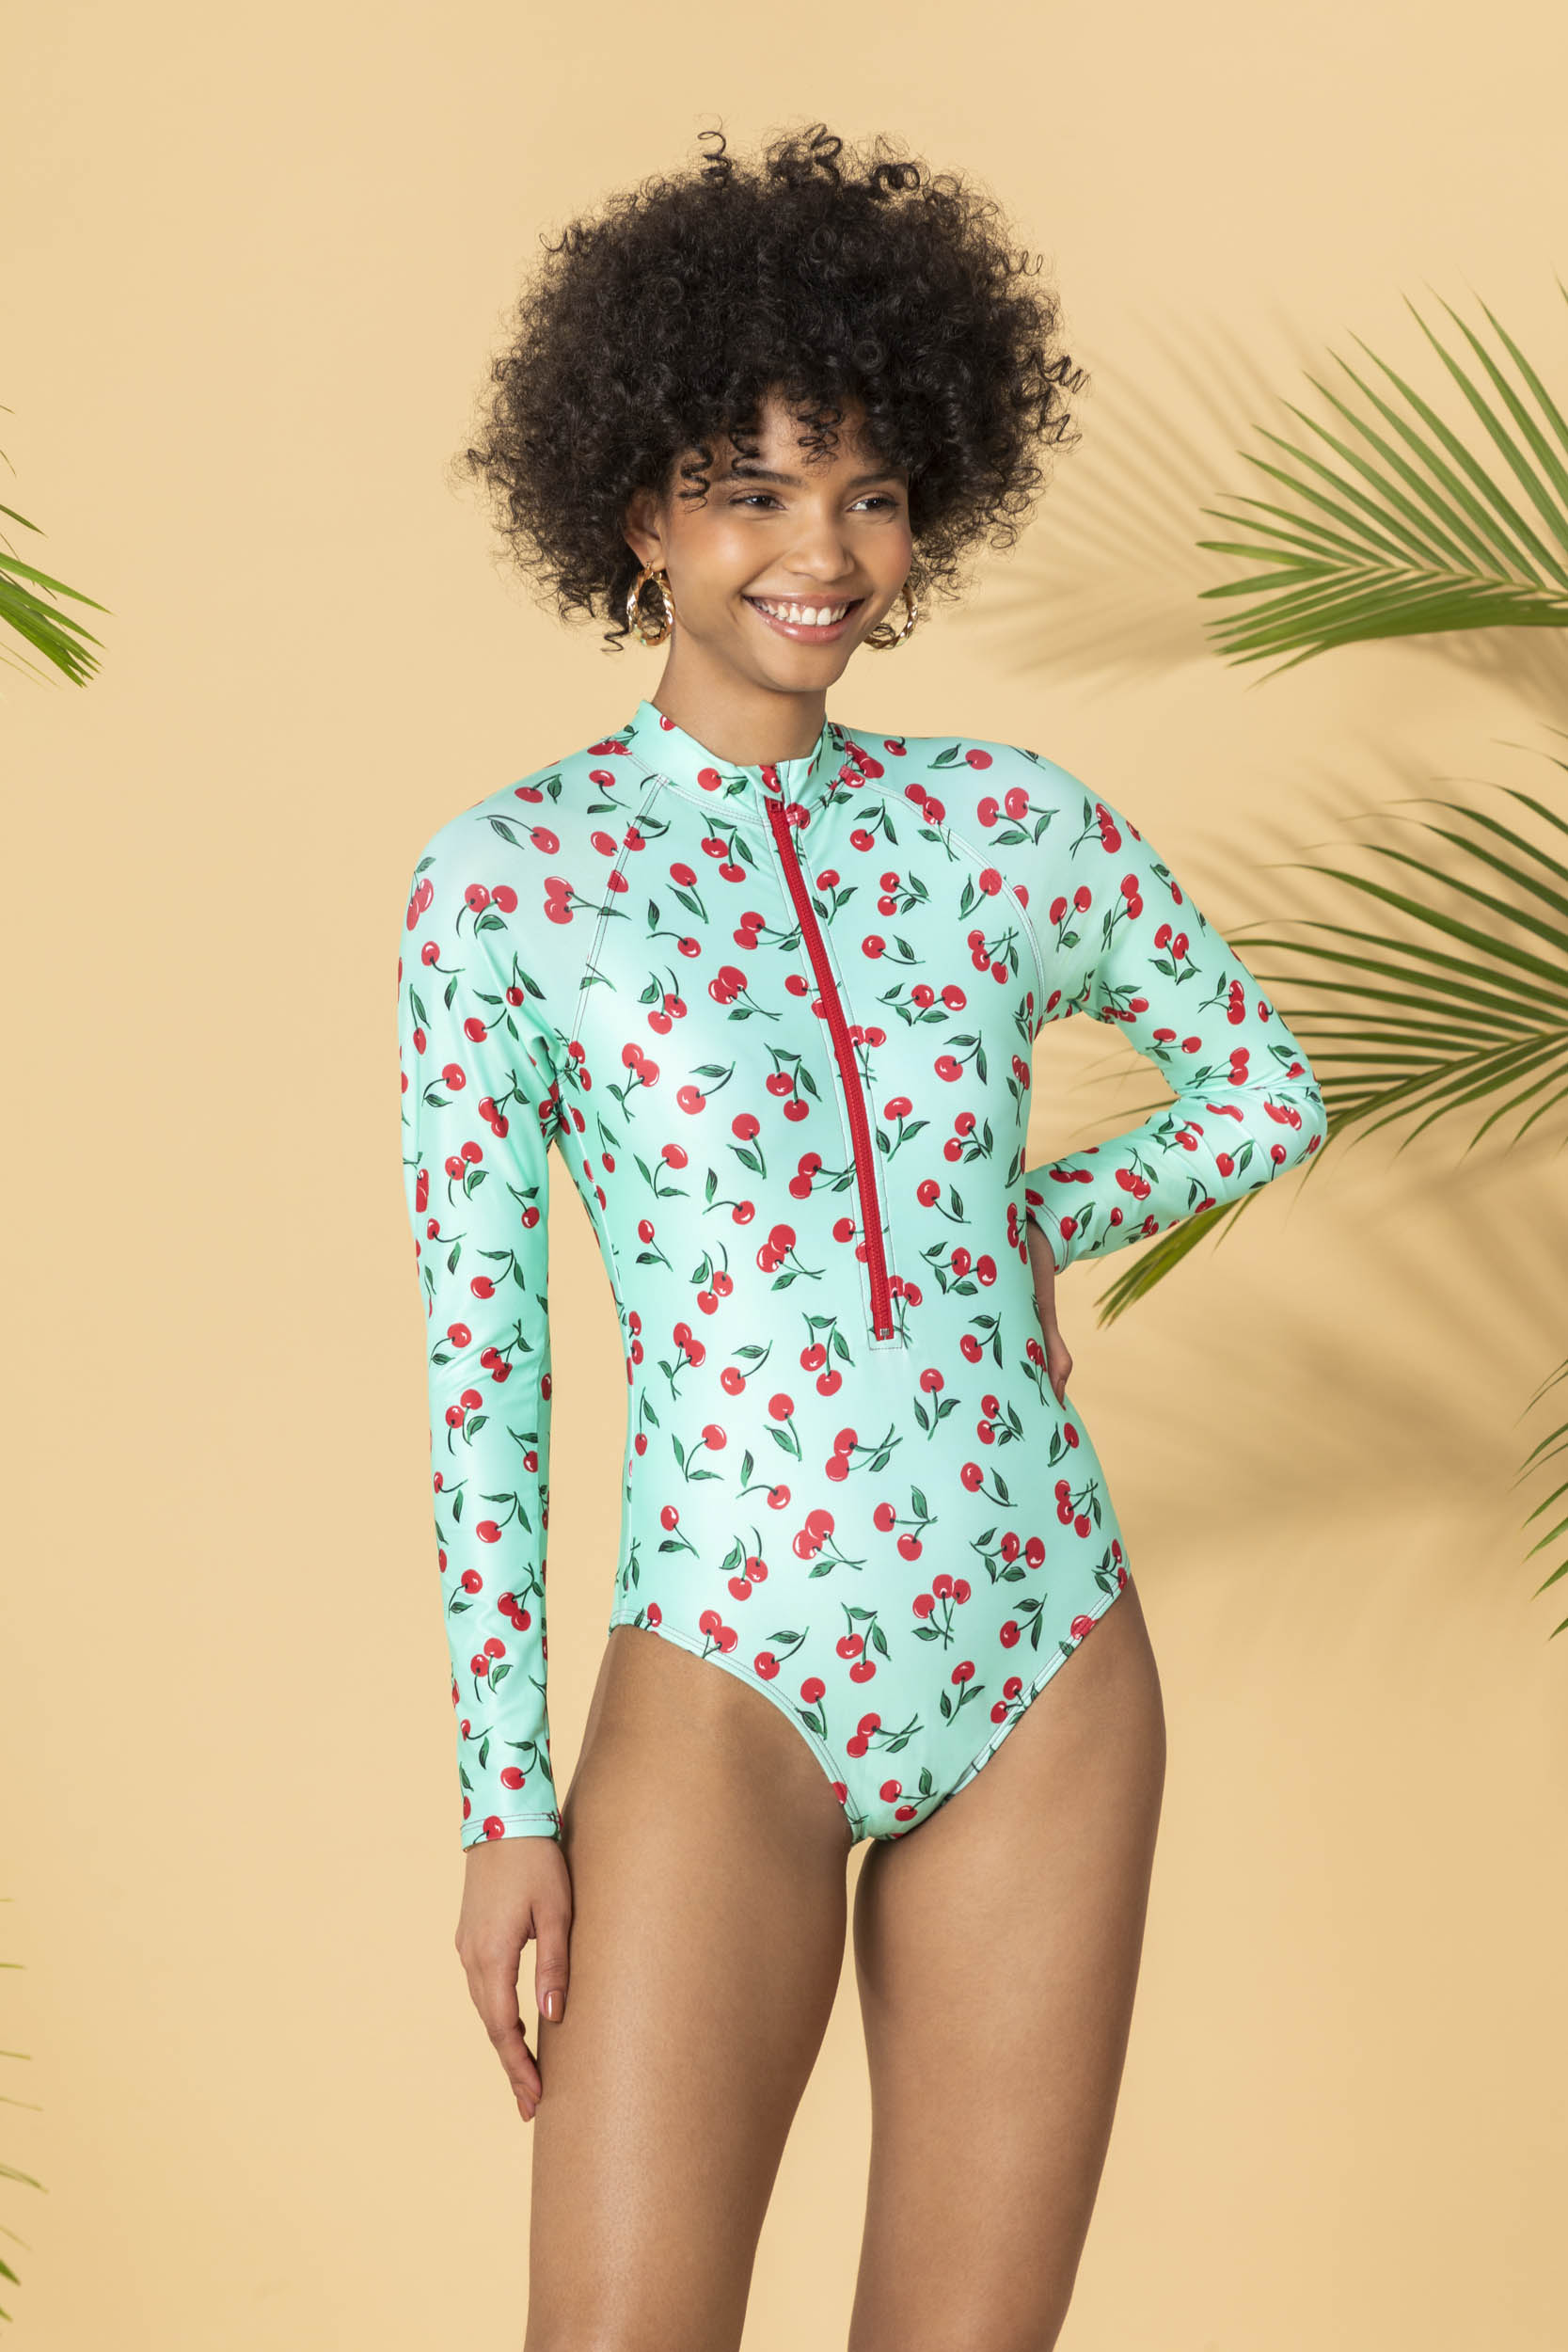 Shoshanna Womens Riviera Floral Long-Sleeve One Piece